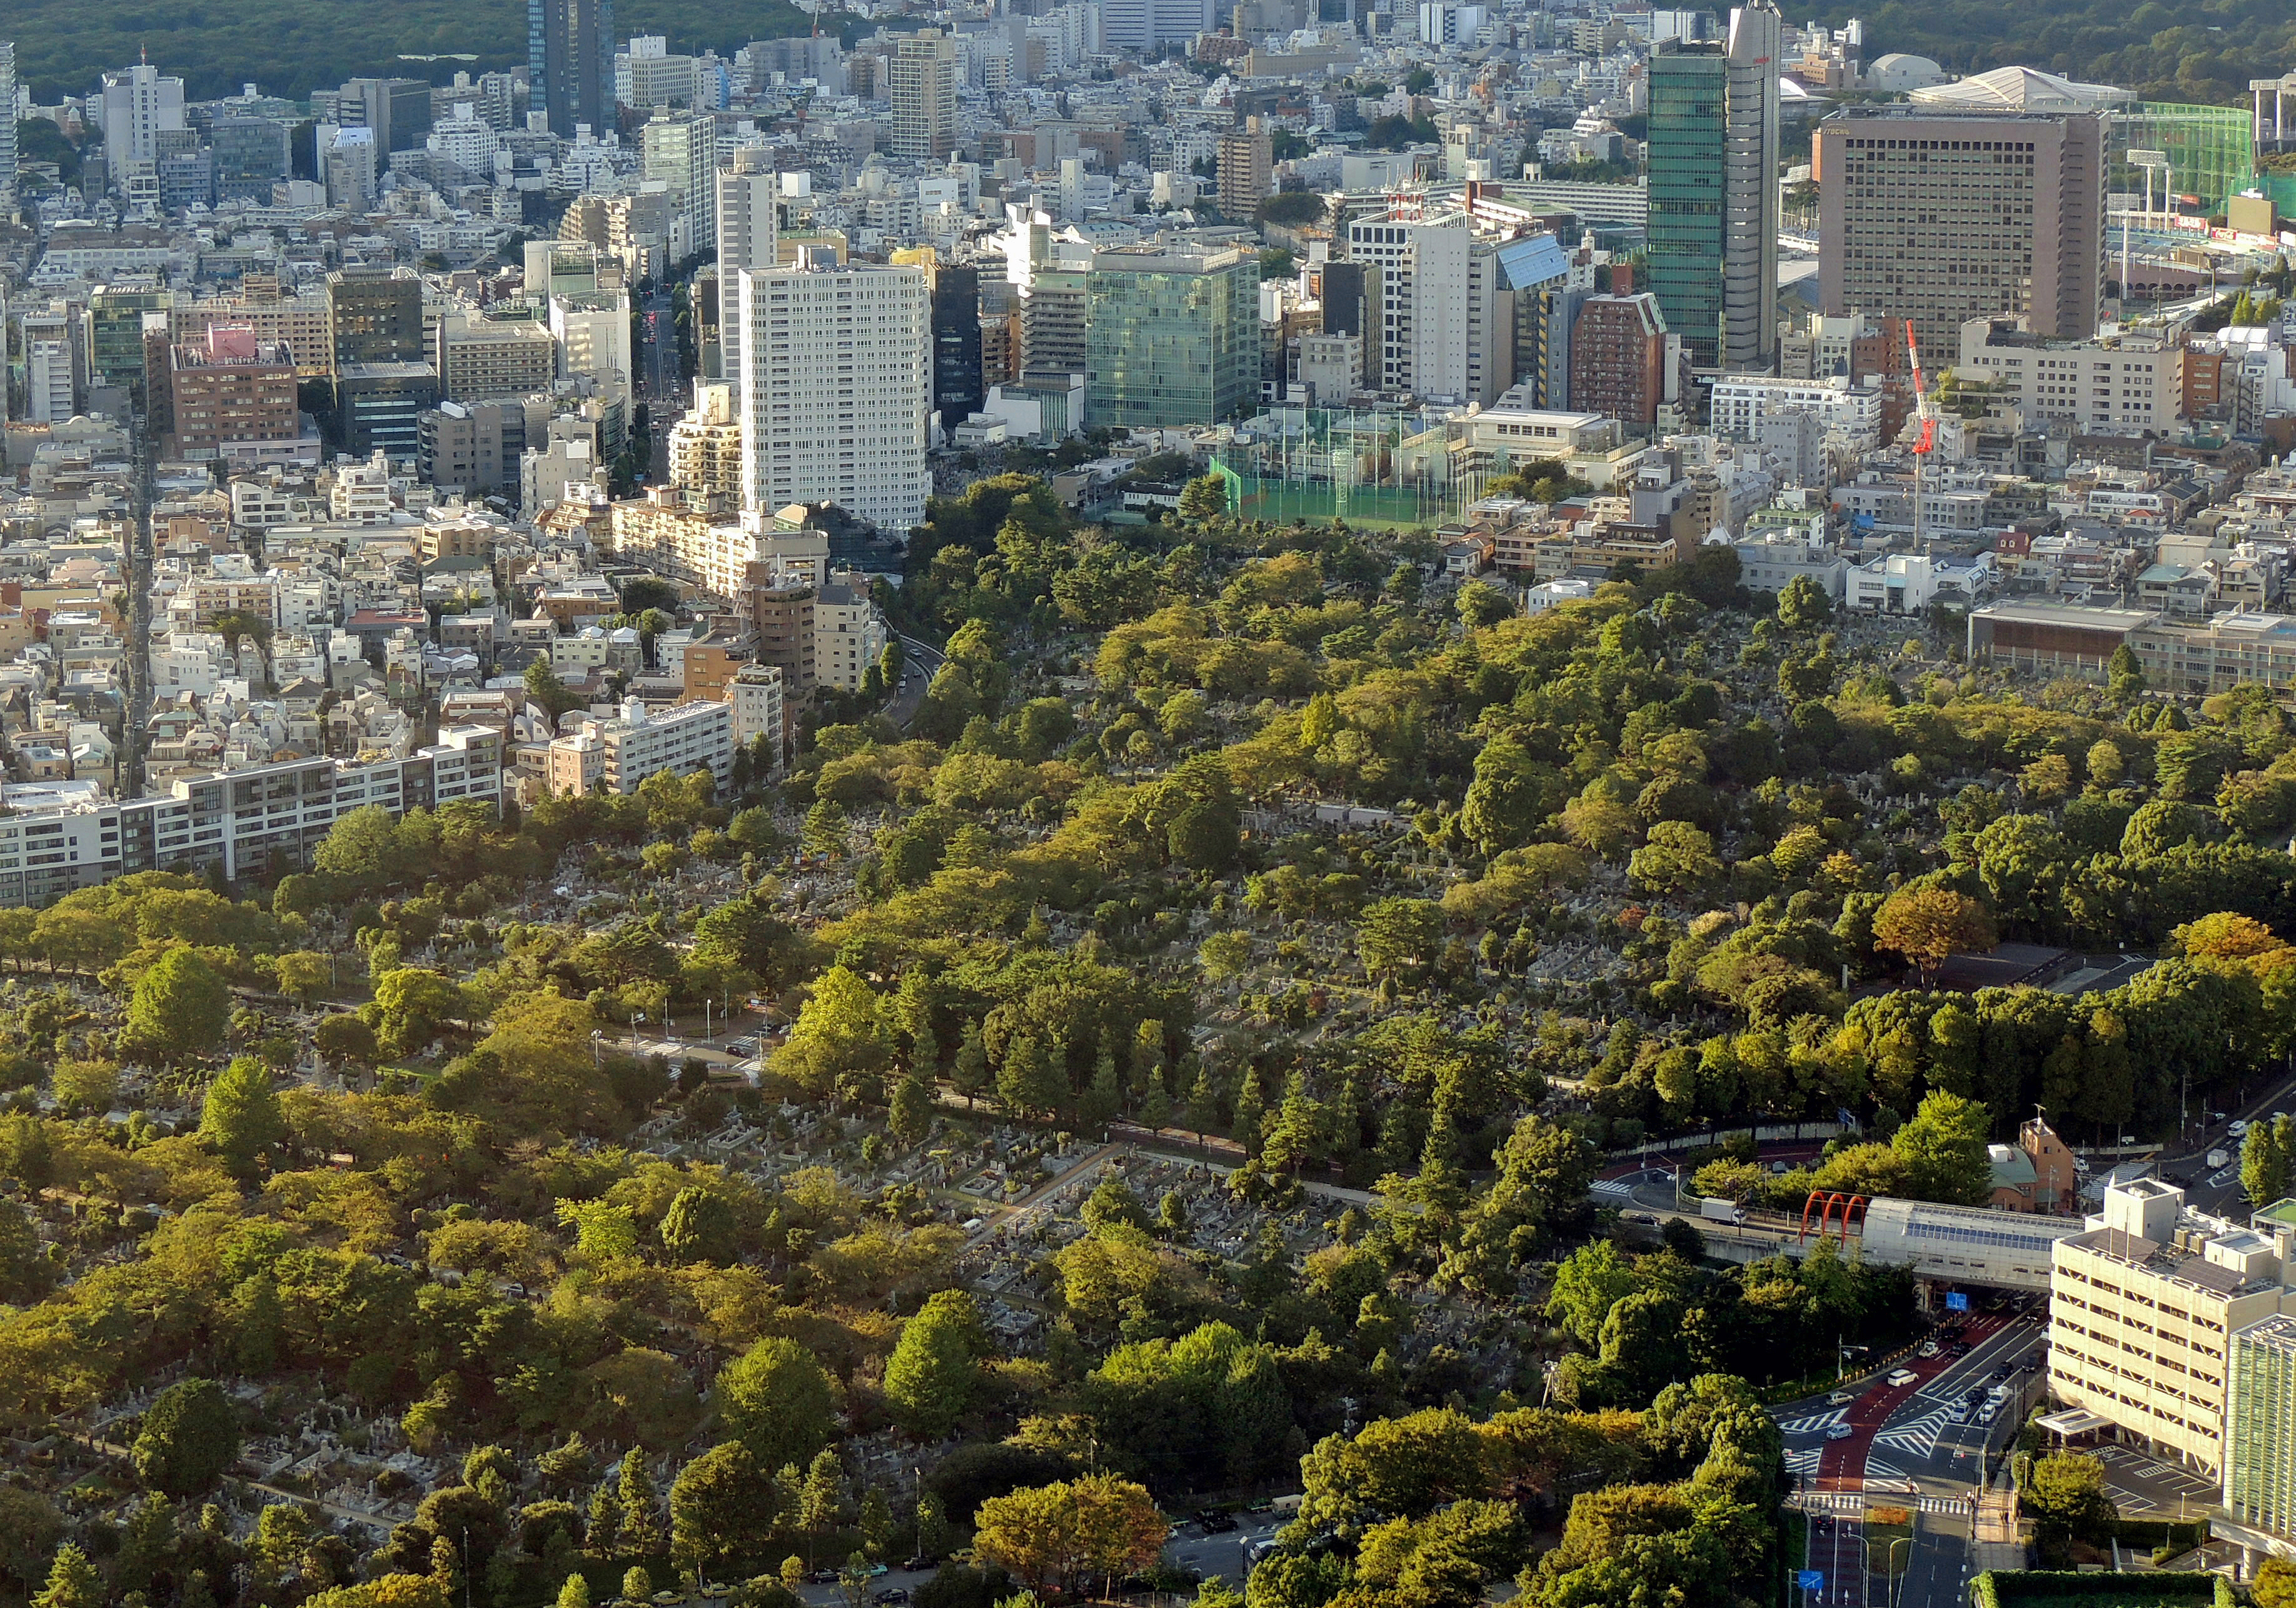 Necropolis: Aoyama Cemetery, occupying some of Tokyo's most valuable land, can be seen from Roppongi Hills. | DAVEY YOUNG